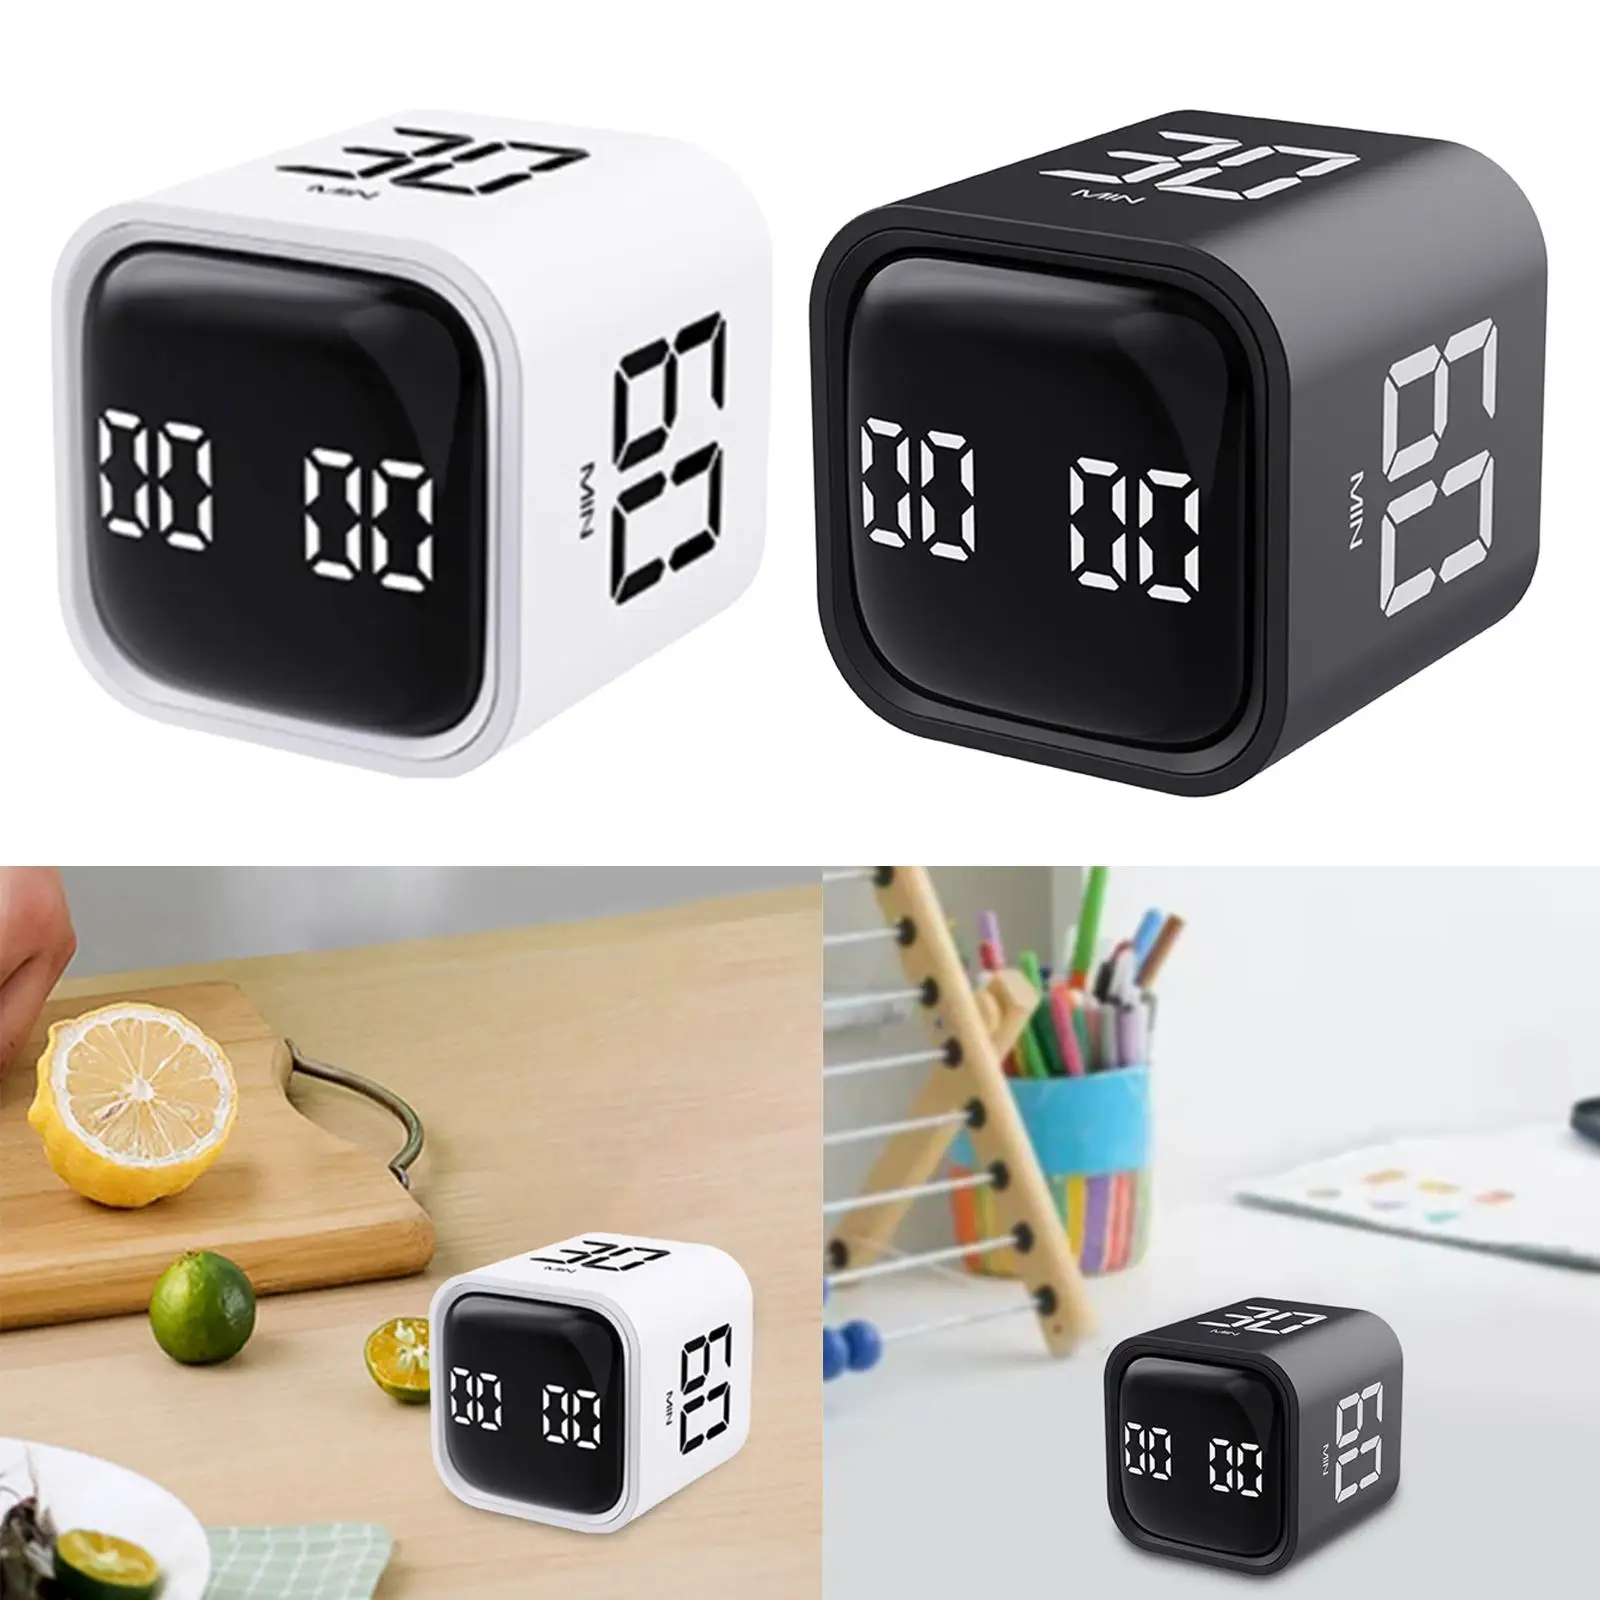 Cube timers Flip Timer Time Management Gravity Sensor Workout Timer Kitchen Timer for Exercise Cooking Office Studying Workout